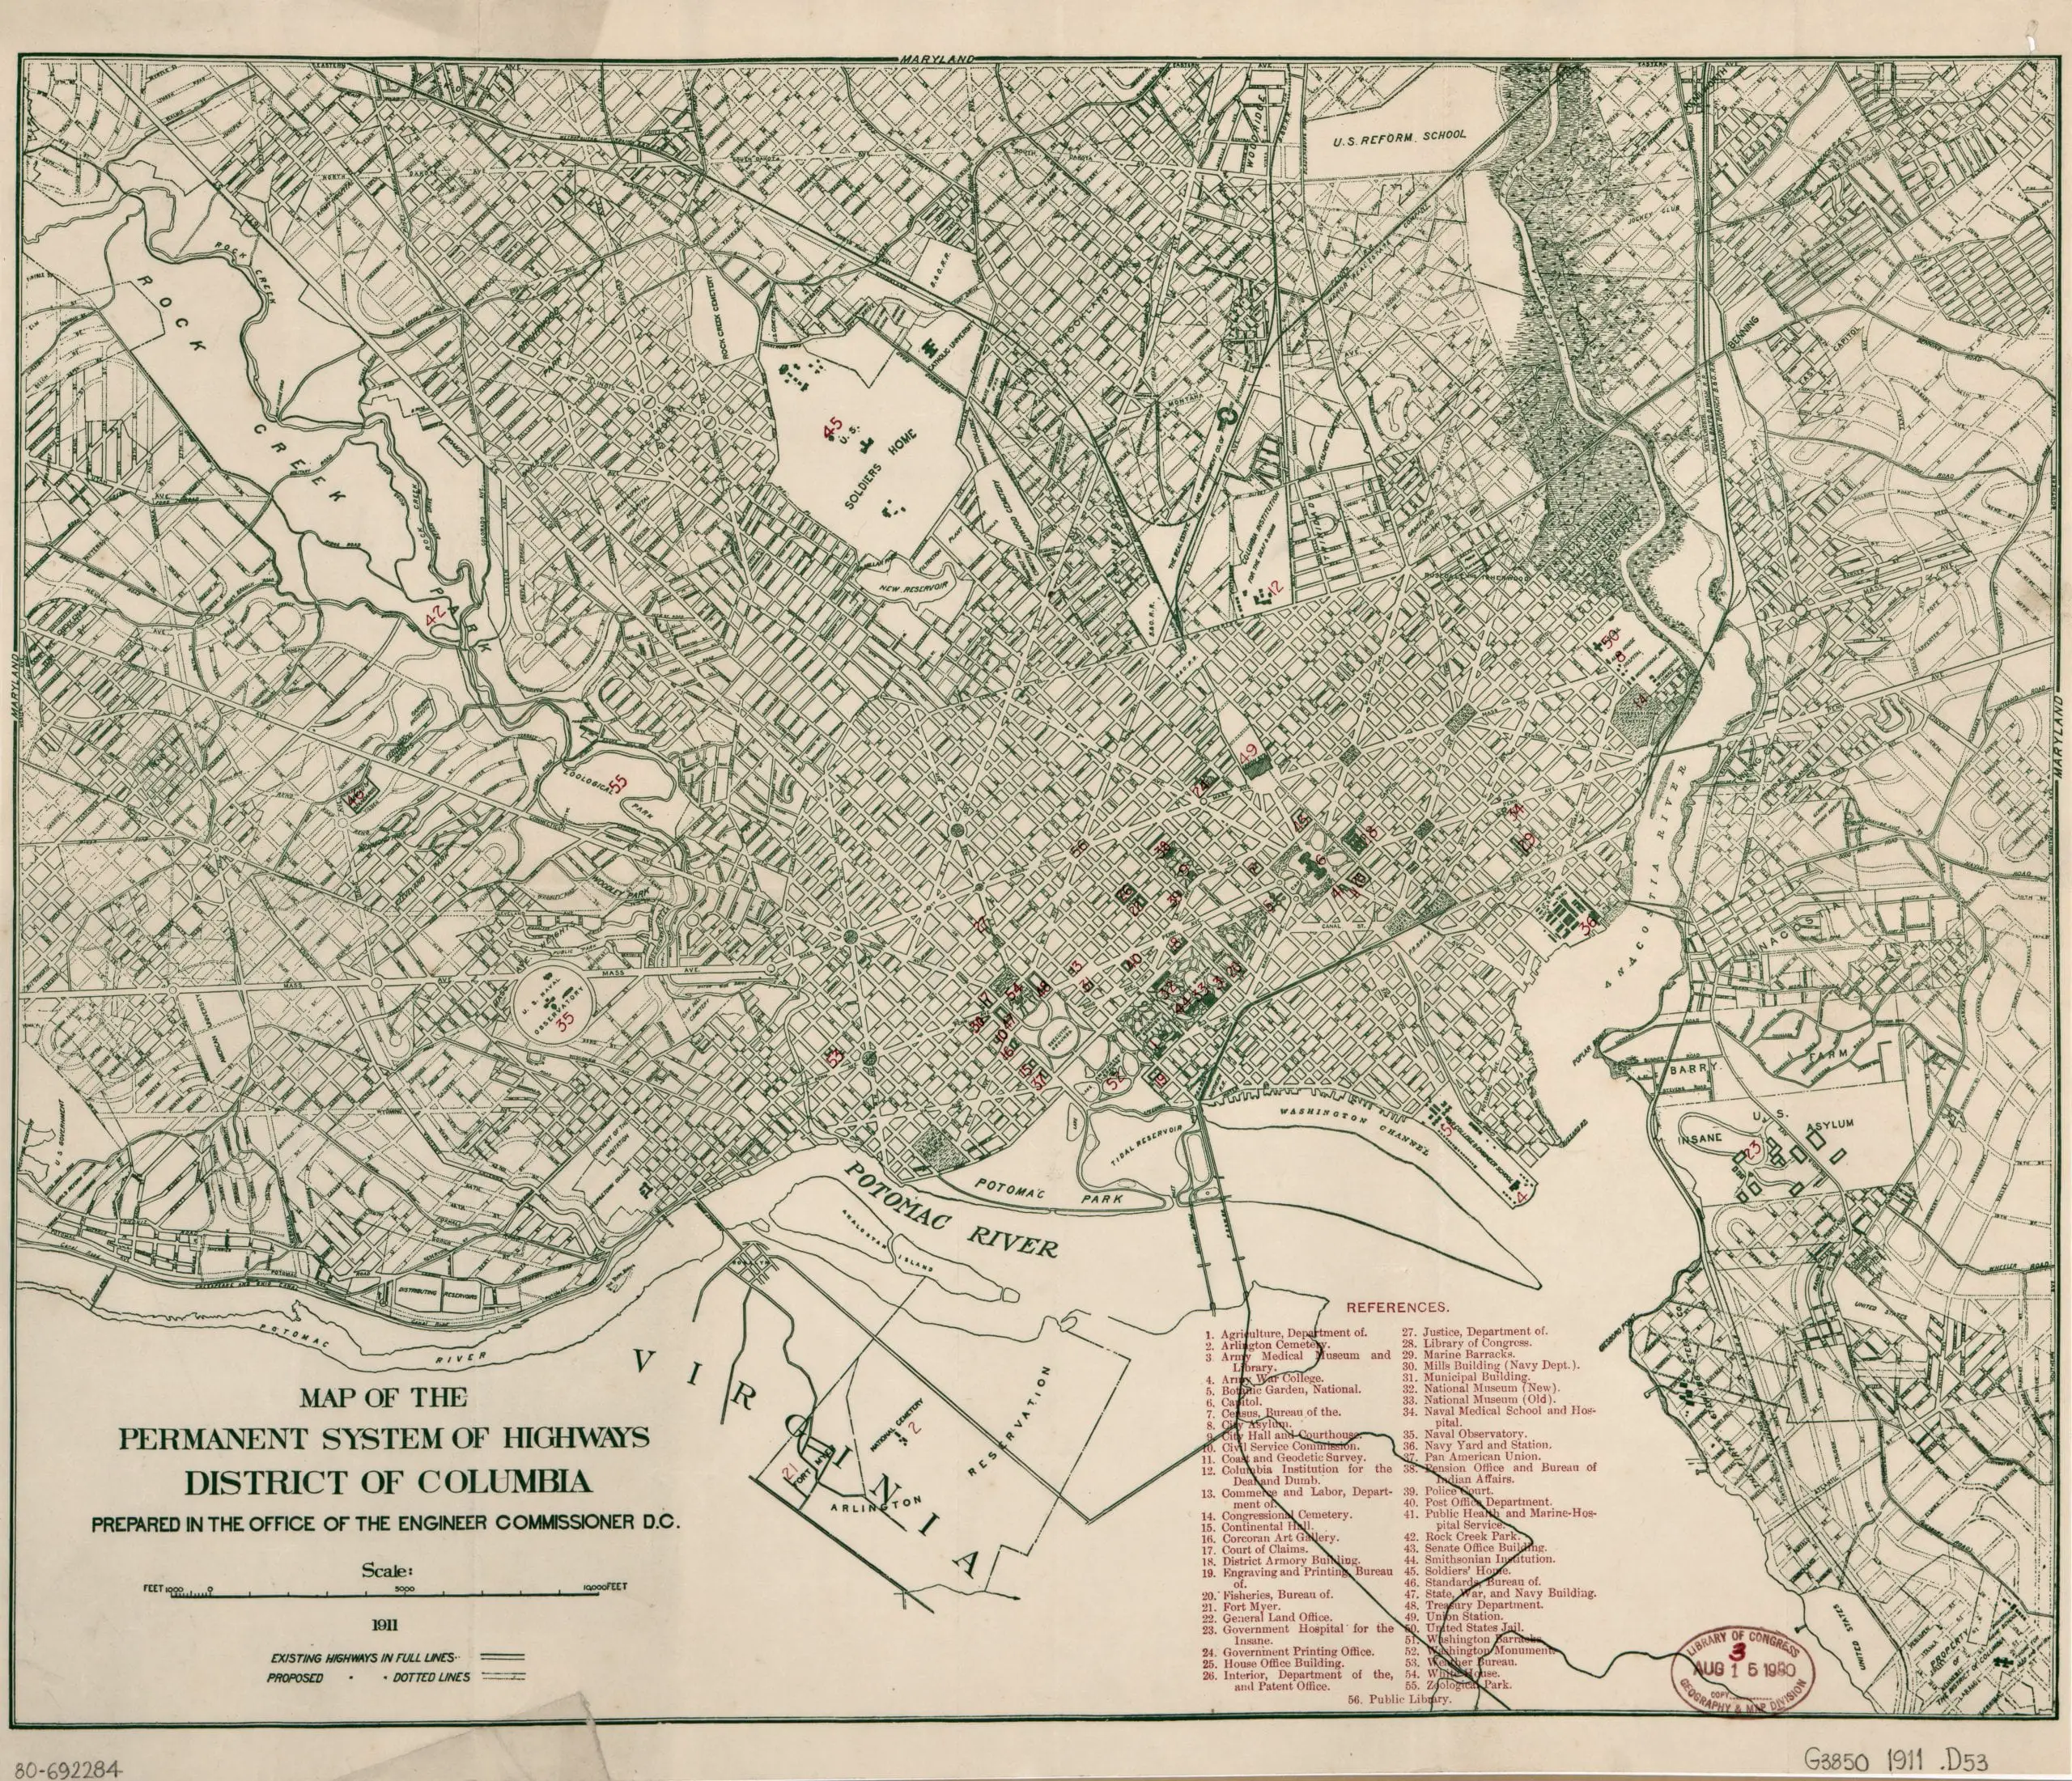 Map of the permanent system of highways, District of Columbia in 1911